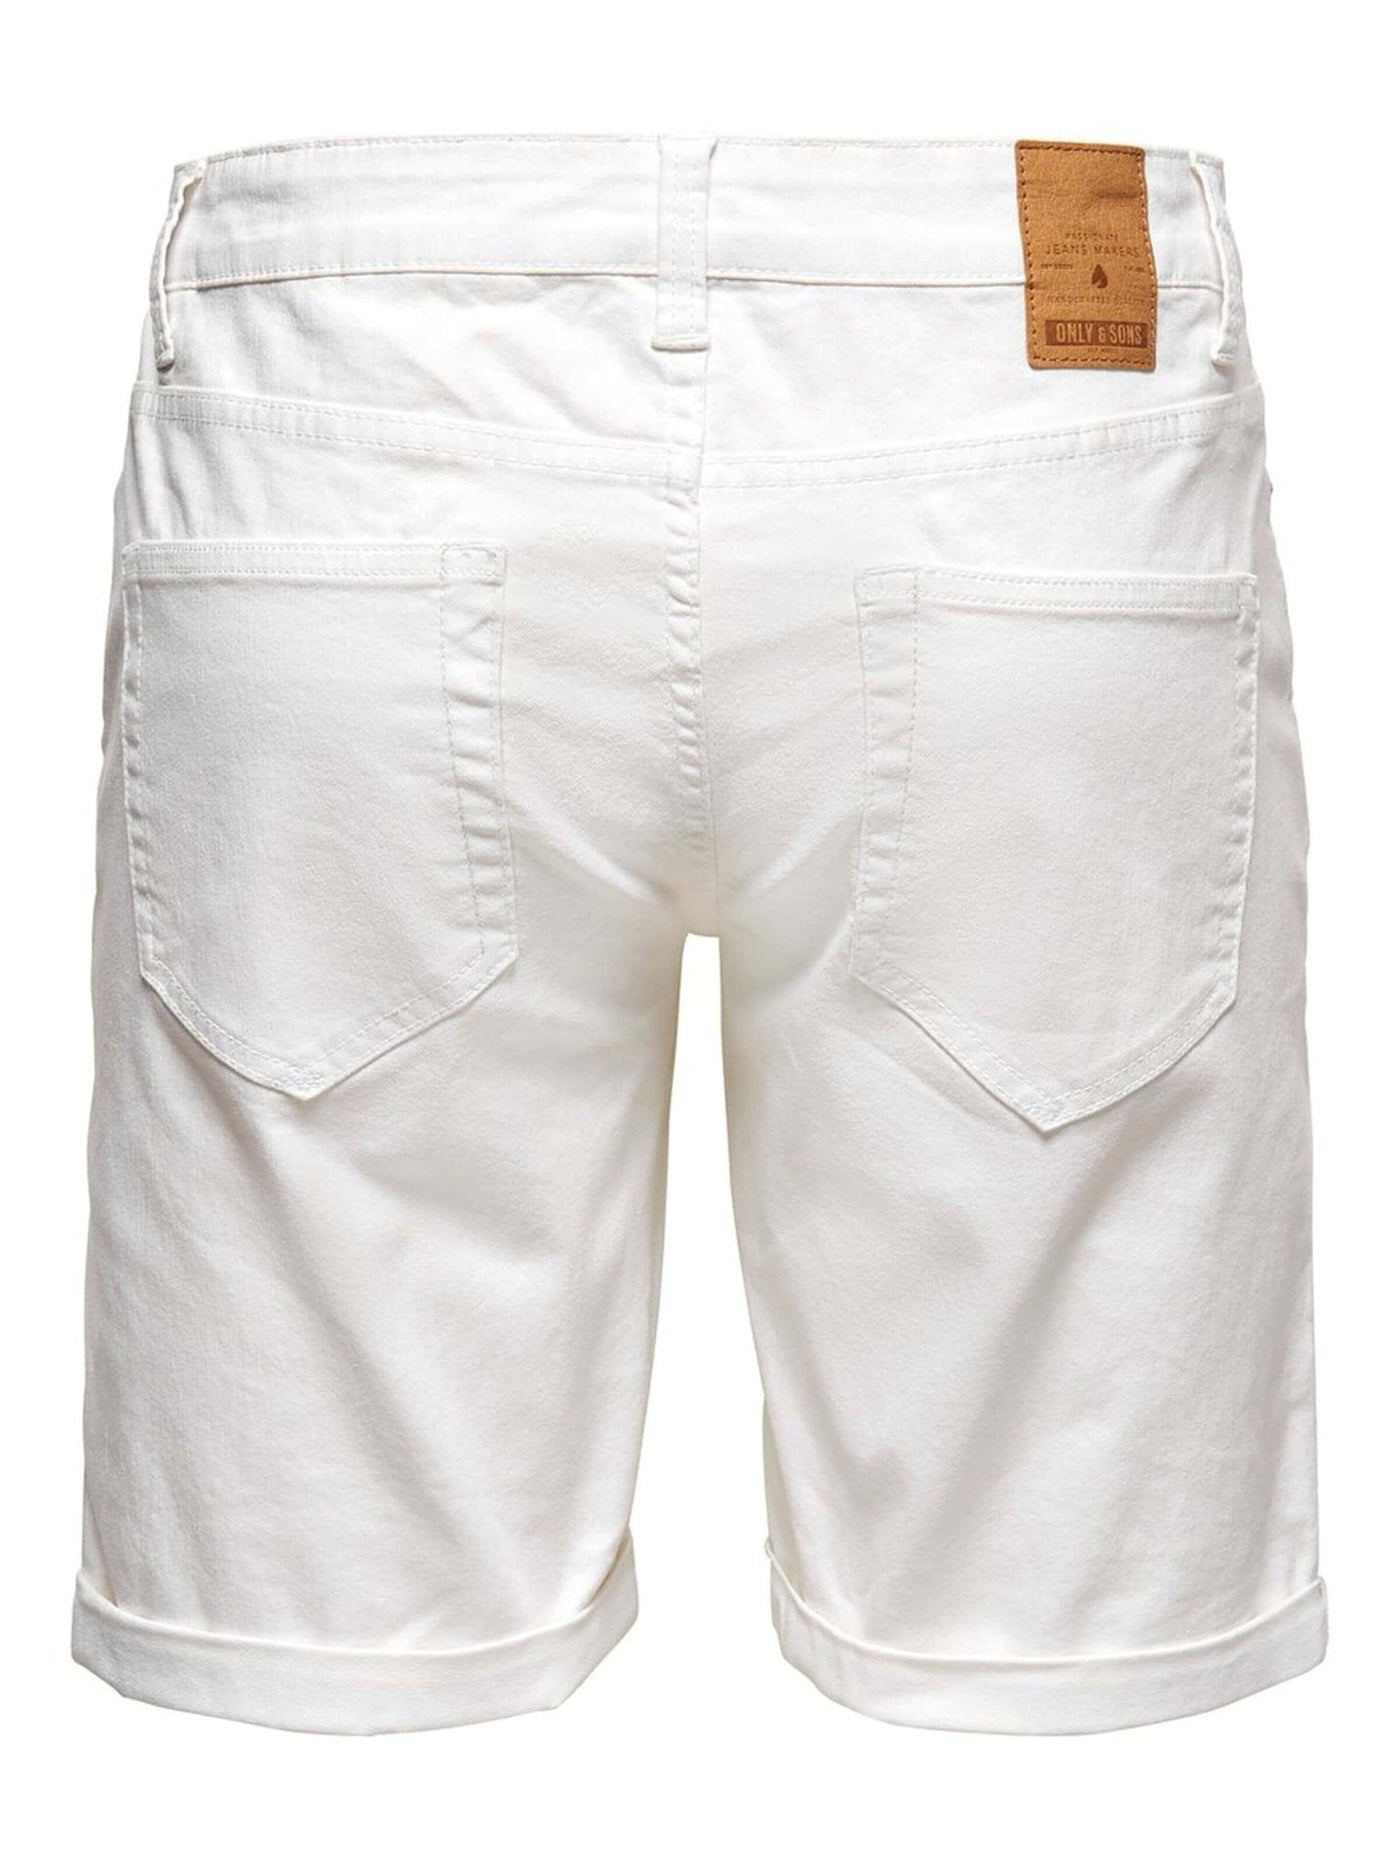 Ply Stretch Shorts - White - Only & Sons - White 2